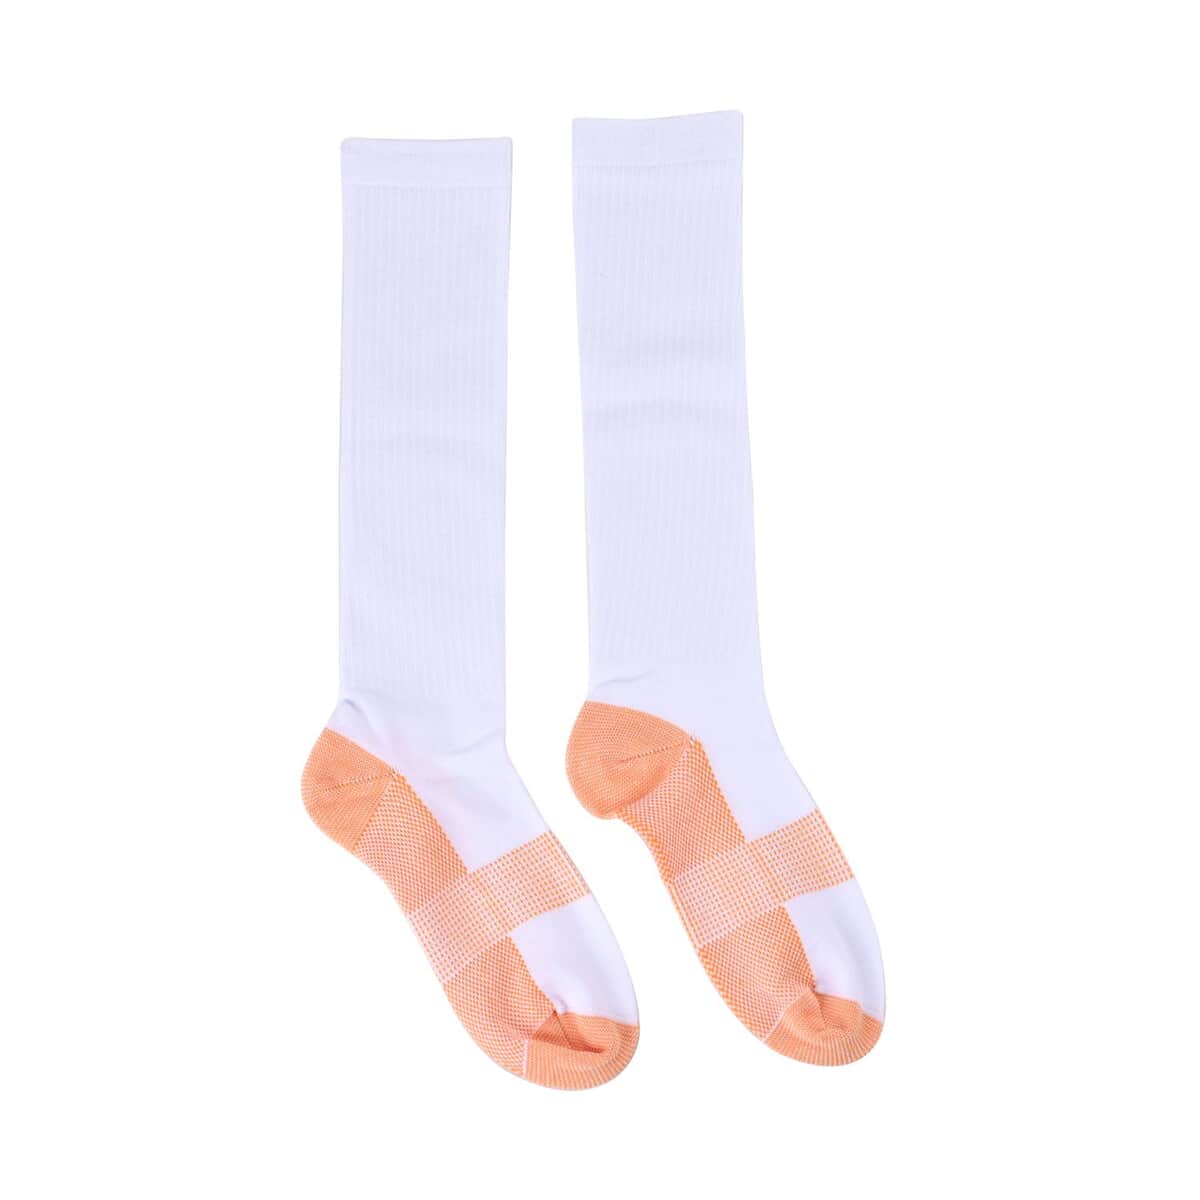 Set of 4 Pairs Copper Infused Compression Knee Length Socks - Classic Multi Color (S/M)  image number 1